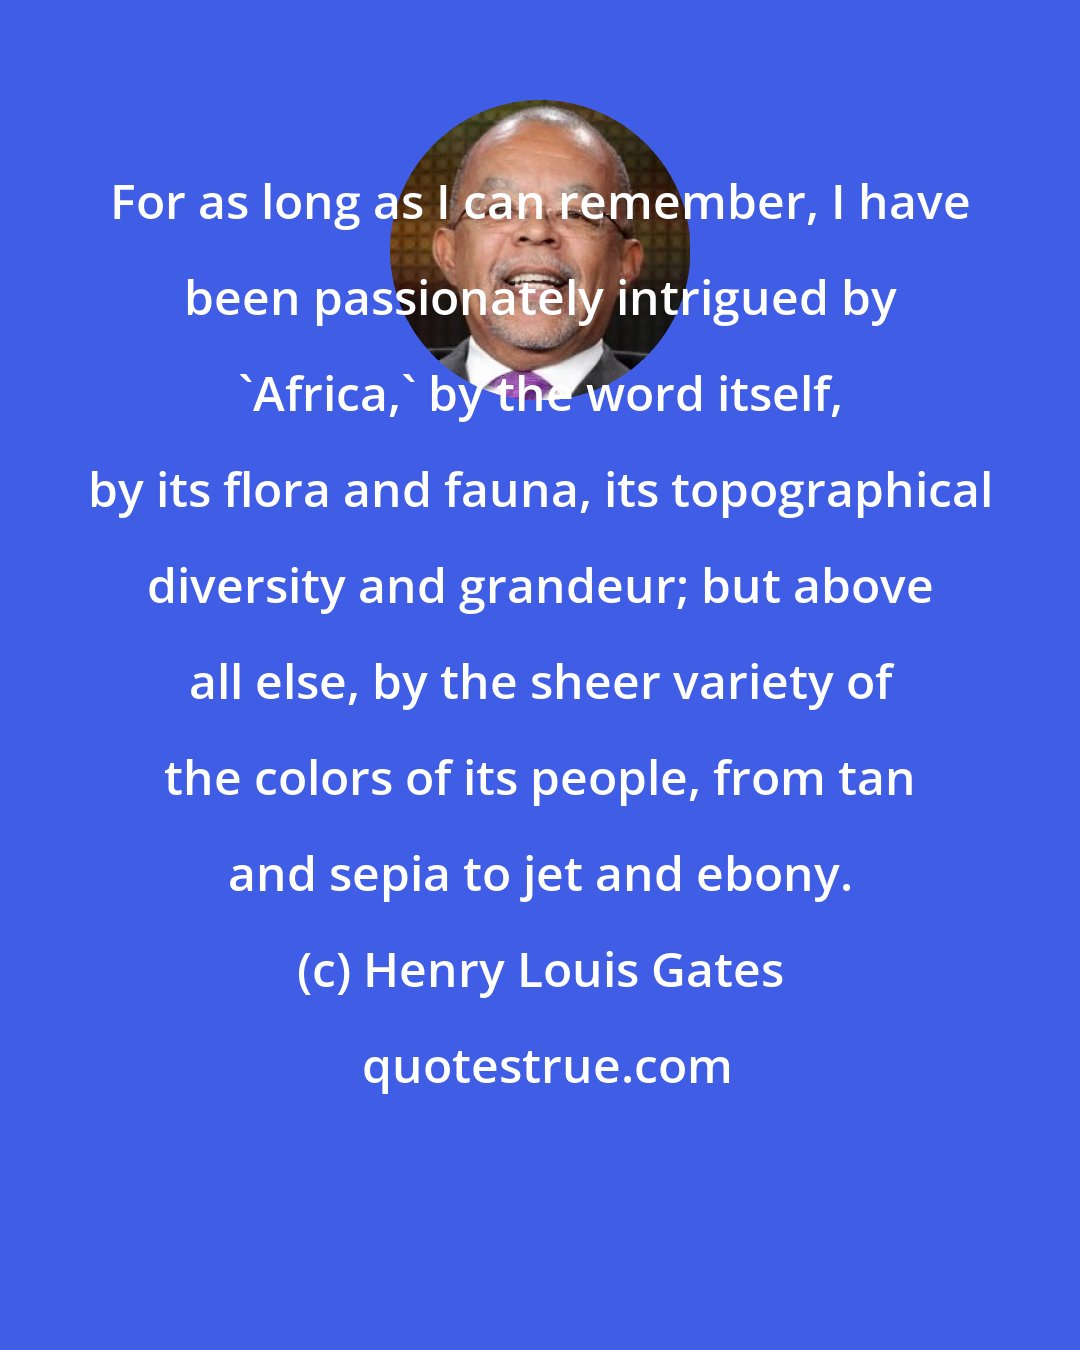 Henry Louis Gates: For as long as I can remember, I have been passionately intrigued by 'Africa,' by the word itself, by its flora and fauna, its topographical diversity and grandeur; but above all else, by the sheer variety of the colors of its people, from tan and sepia to jet and ebony.